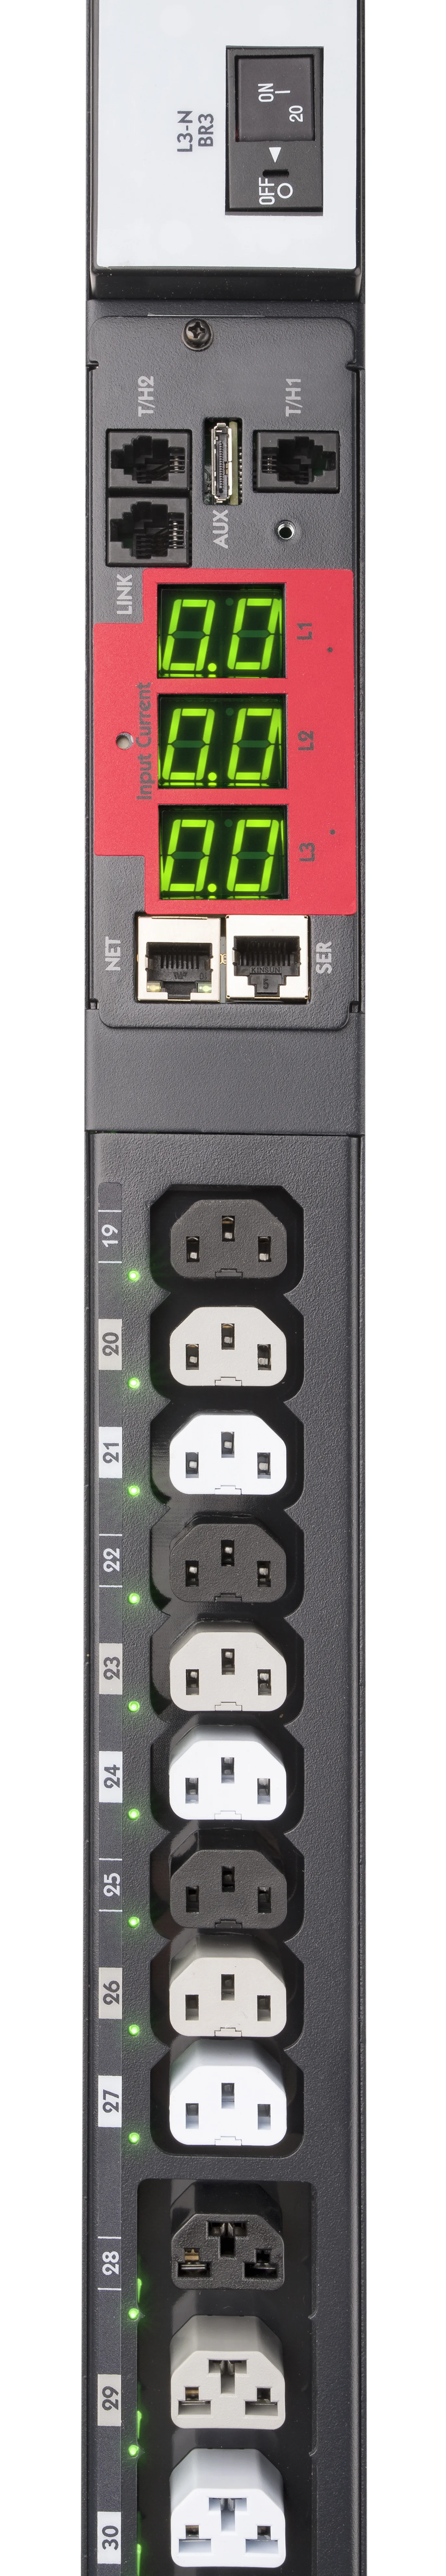 PDU_Net_Card_w_Outlets-6707_RGB.png